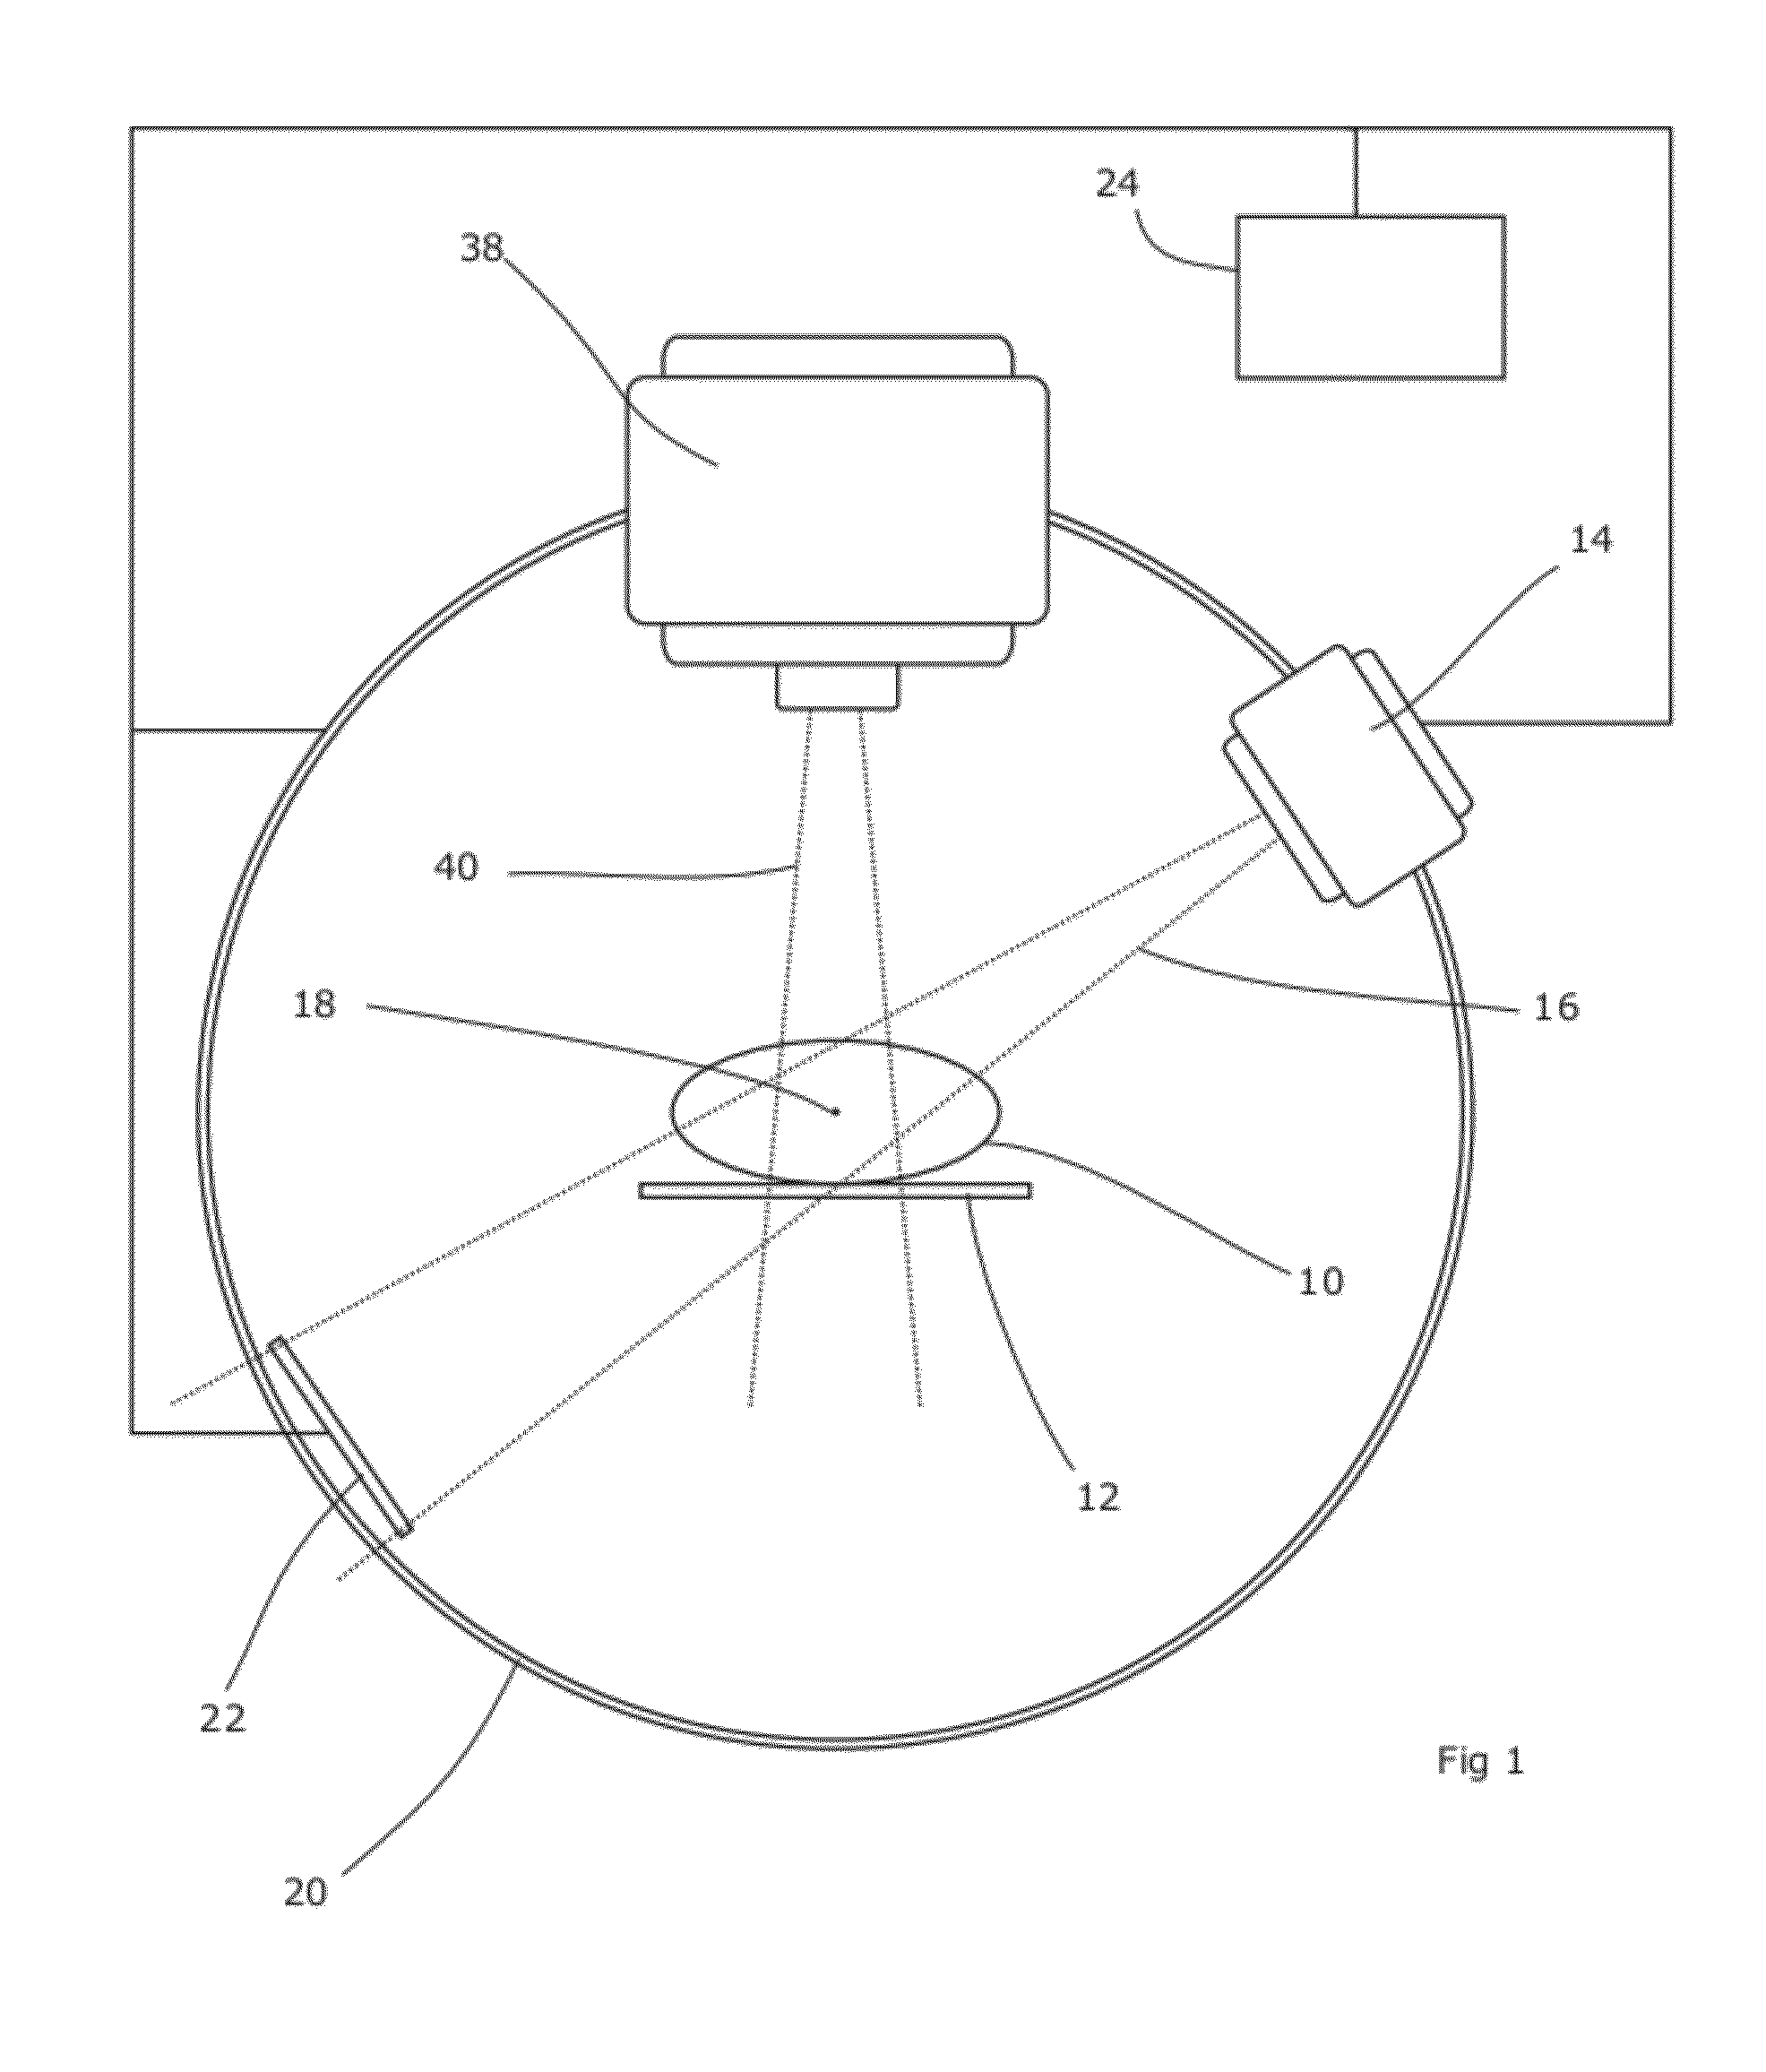 Radiotherapy and imaging methods and apparatus